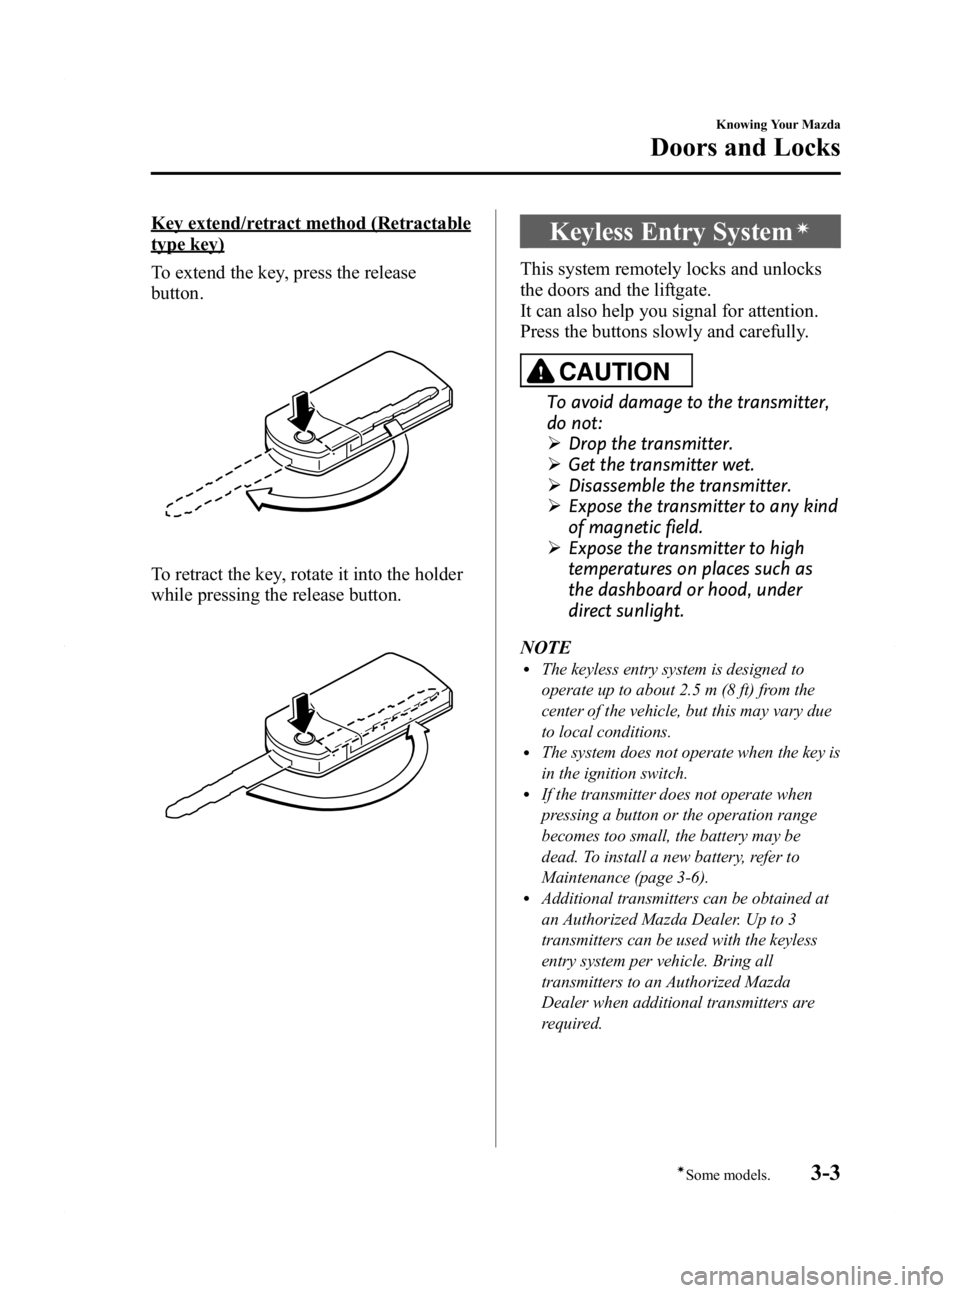 MAZDA MODEL 2 2011  Owners Manual Black plate (71,1)
Key extend/retract method (Retractable
type key)
To extend the key, press the release
button.
To retract the key, rotate it into the holder
while pressing the release button.
Keyles